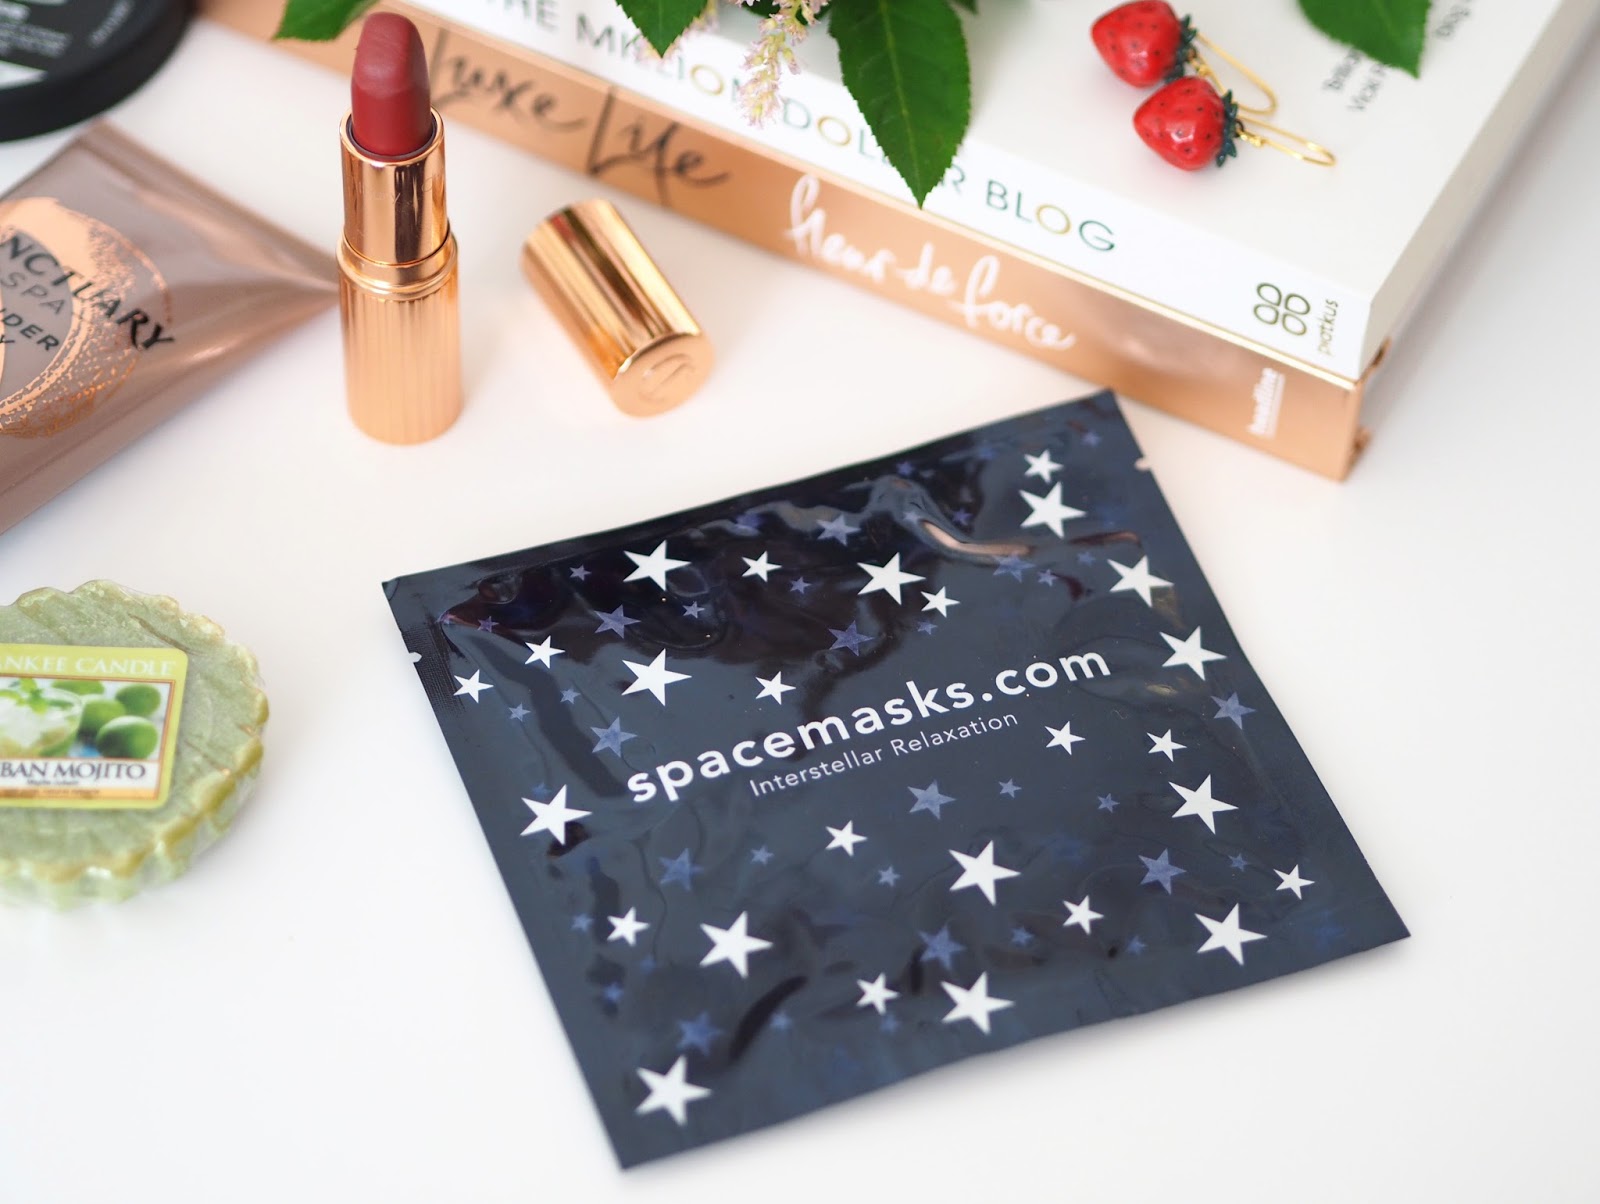 Loves List July, Katie Kirk Loves, UK Blogger, Beauty Blogger, Fashion Blogger, Beauty Favourites, Lush Cosmetics, Charlotte Tilbury, Sanctuary Spa, Spacemasks Eye Masks, Yankee Candle, And Mary Jewellery, Summer Favourites